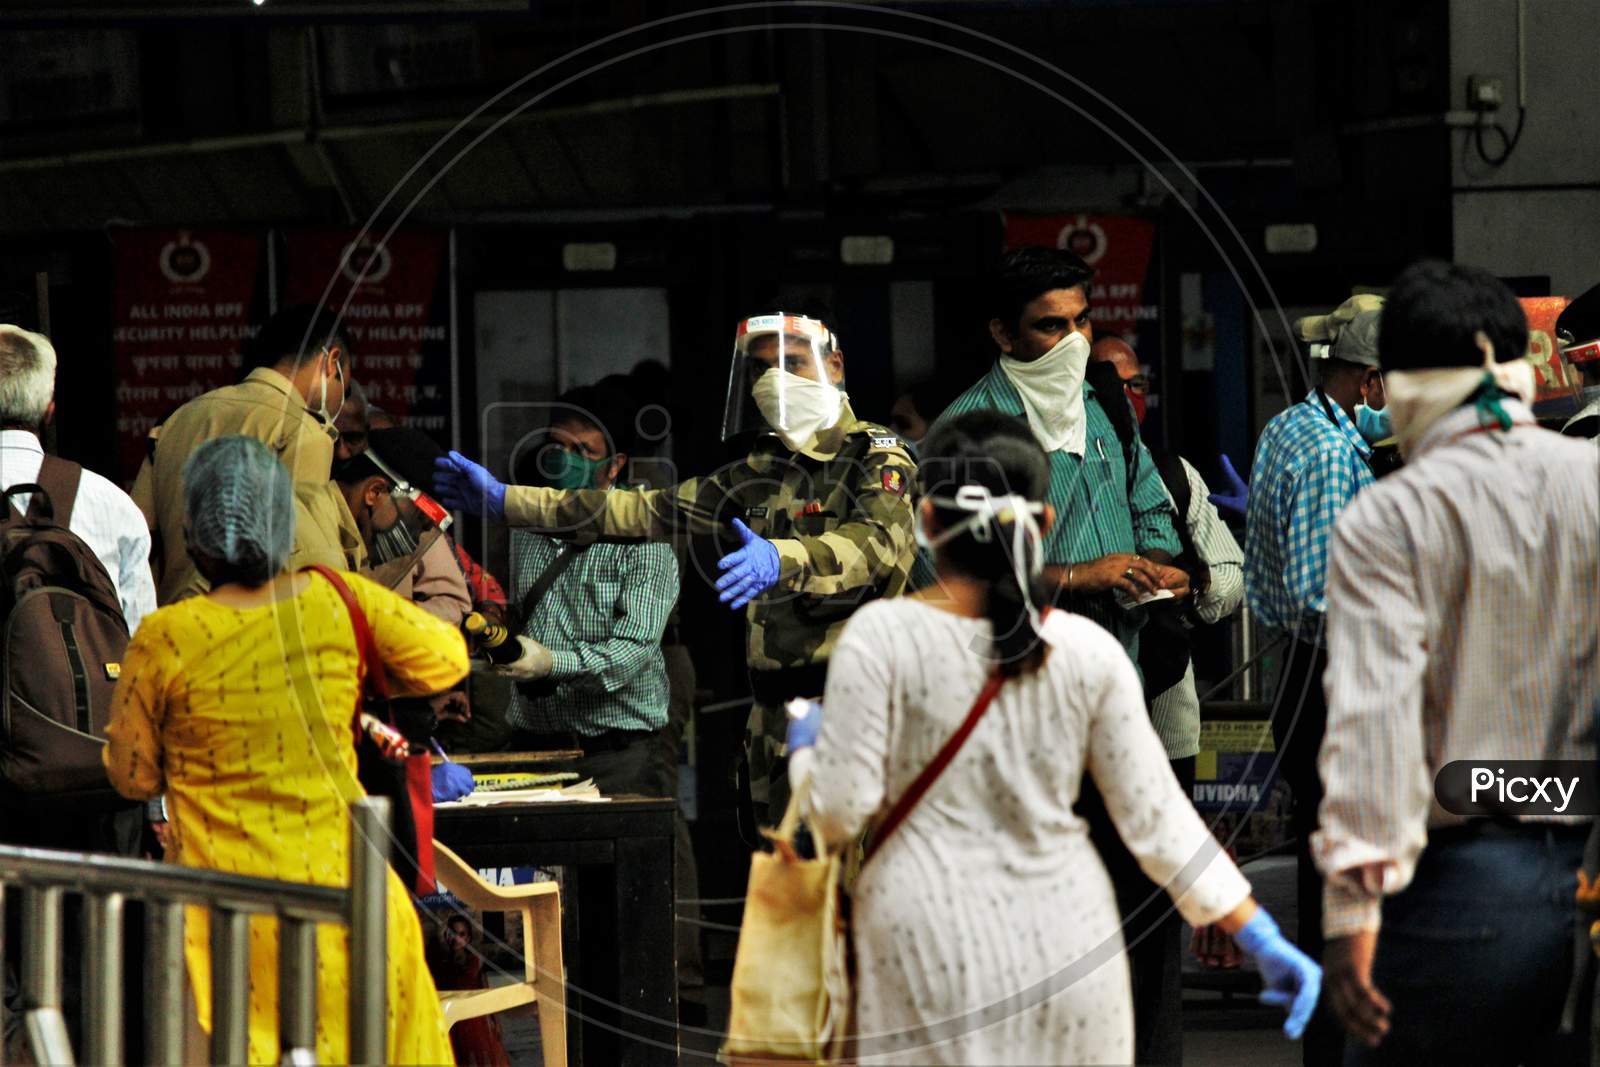 A CRPF official instructs the commuters to maintain social distancing, at Churchgate station, after the government eased a nationwide lockdown imposed as a preventive measure against the COVID-19 coronavirus, at Churchgate station, in Mumbai, India, on June 16, 2020.